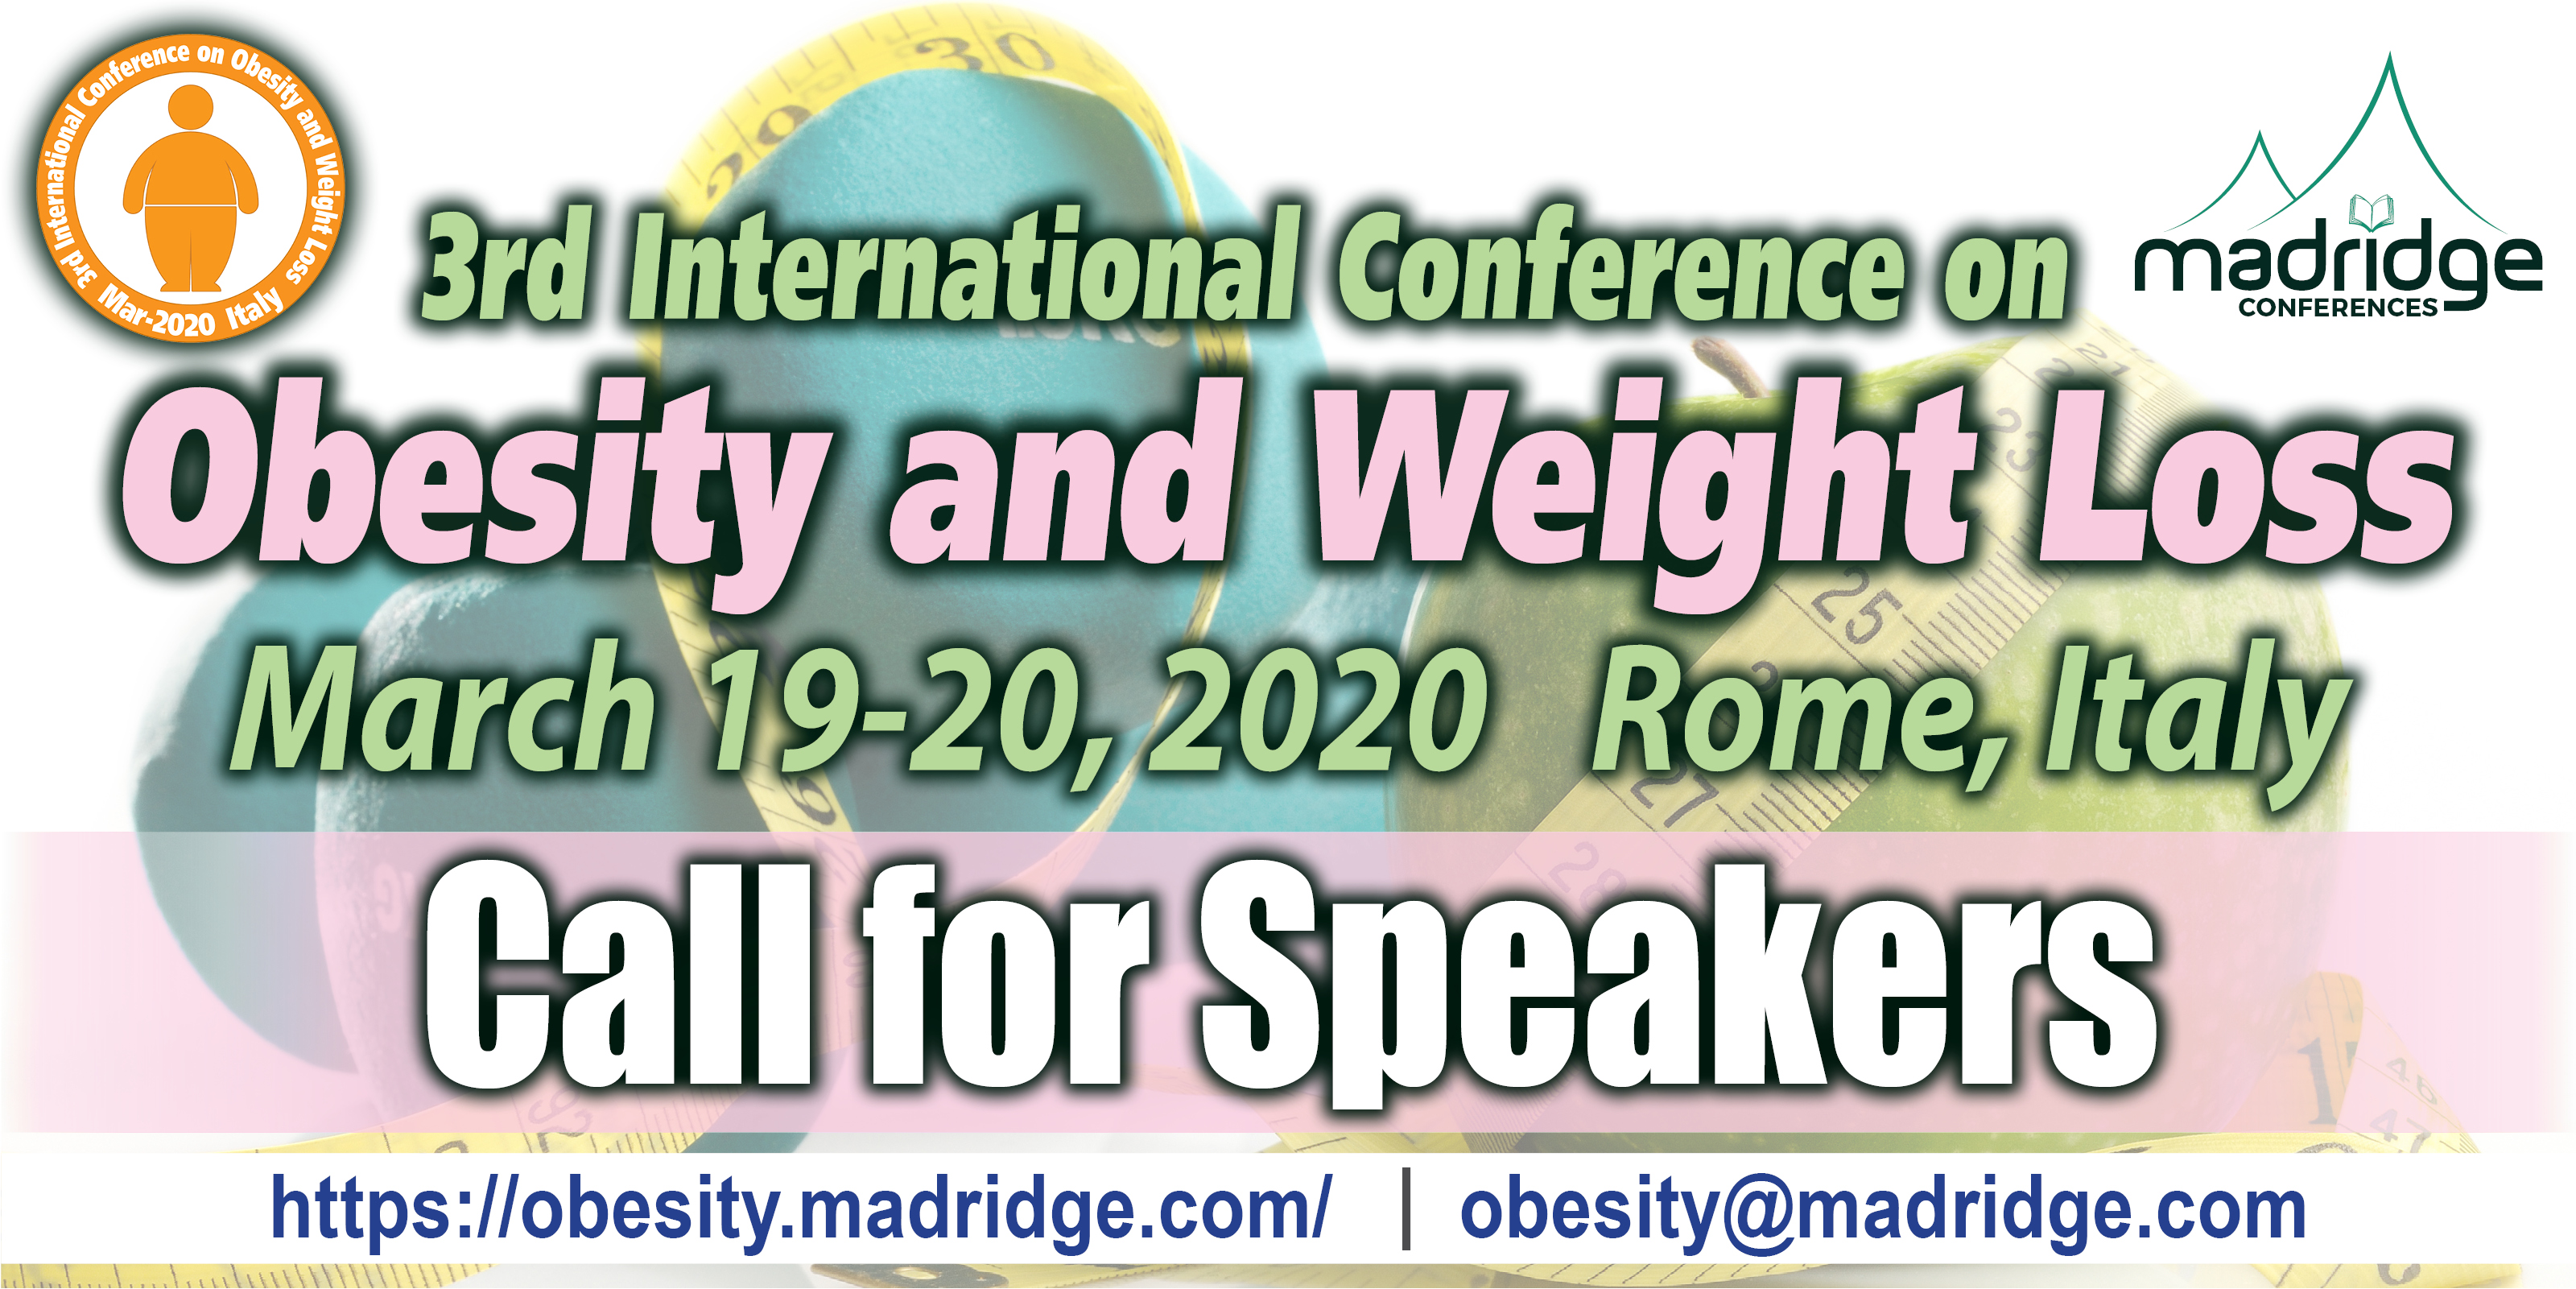 3rd International Conference on Obesity and Weight Loss, Rome, Italy, Italy